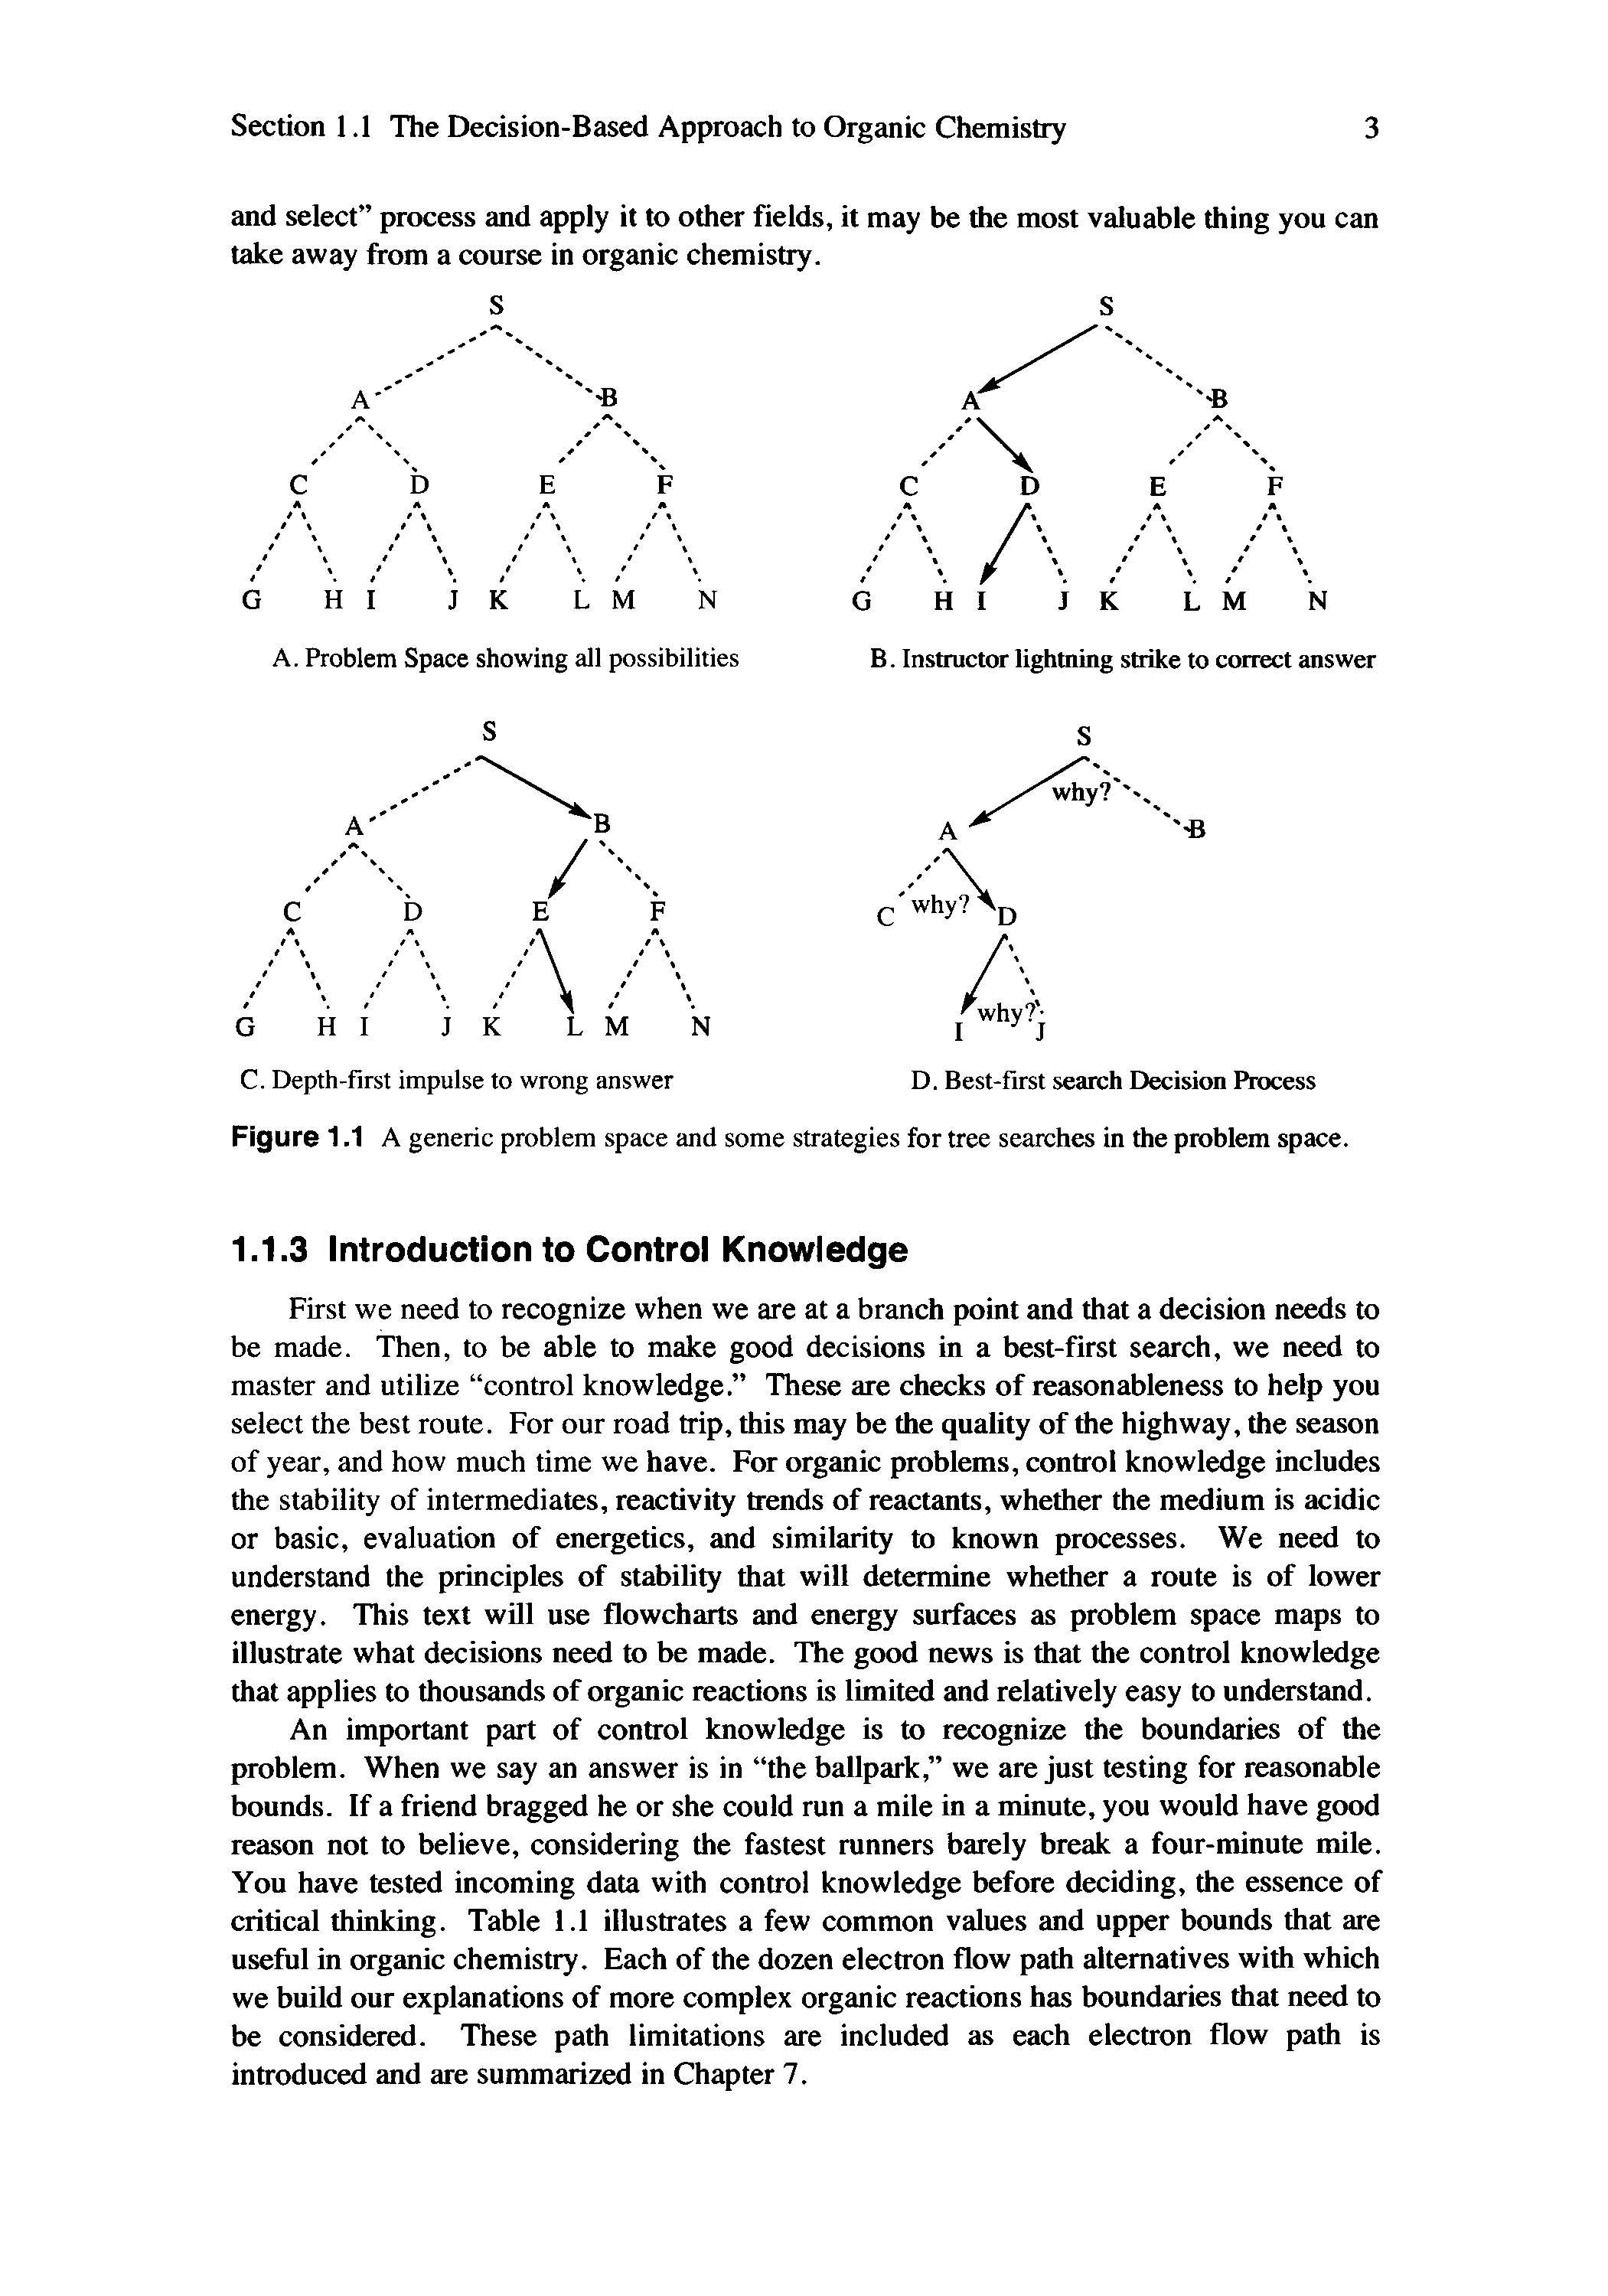 Figure 1.1 A generic problem space and some strategies for tree searches in the problem space.